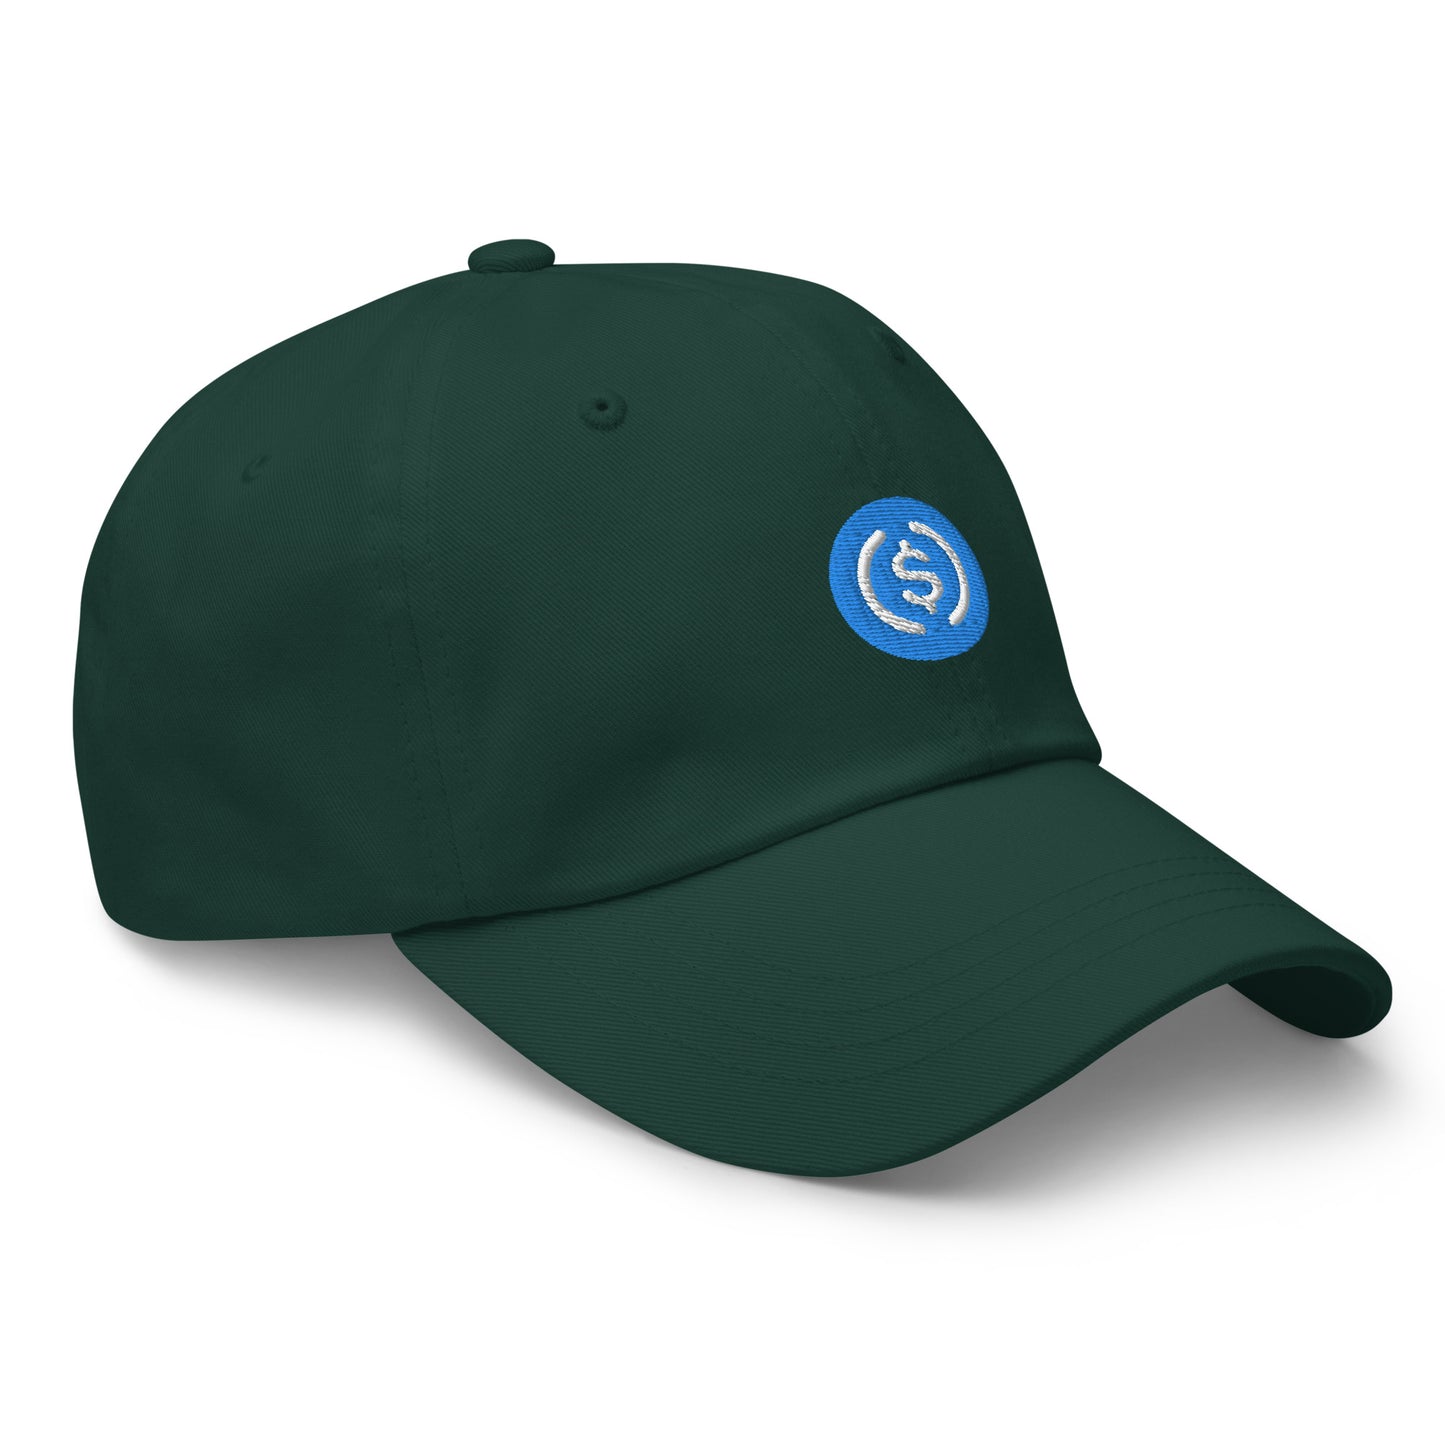 USD Coin (USDC) - Fitted baseball cap